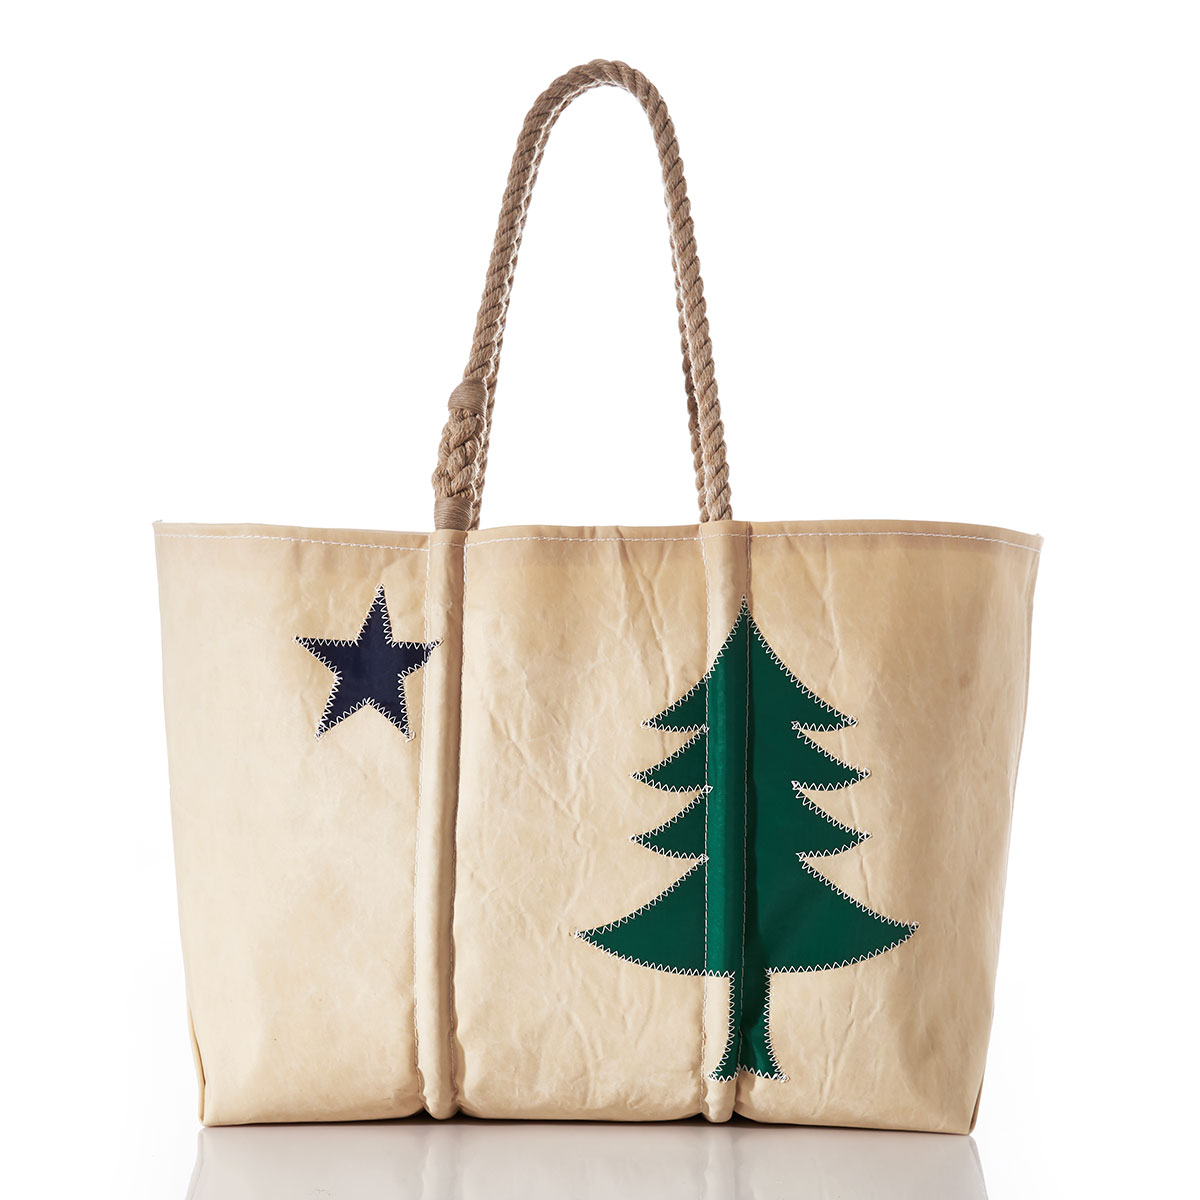 recycled sail cloth tote featuring a navy star and green pine tree from Maine's original state flag, with hemp rope handles